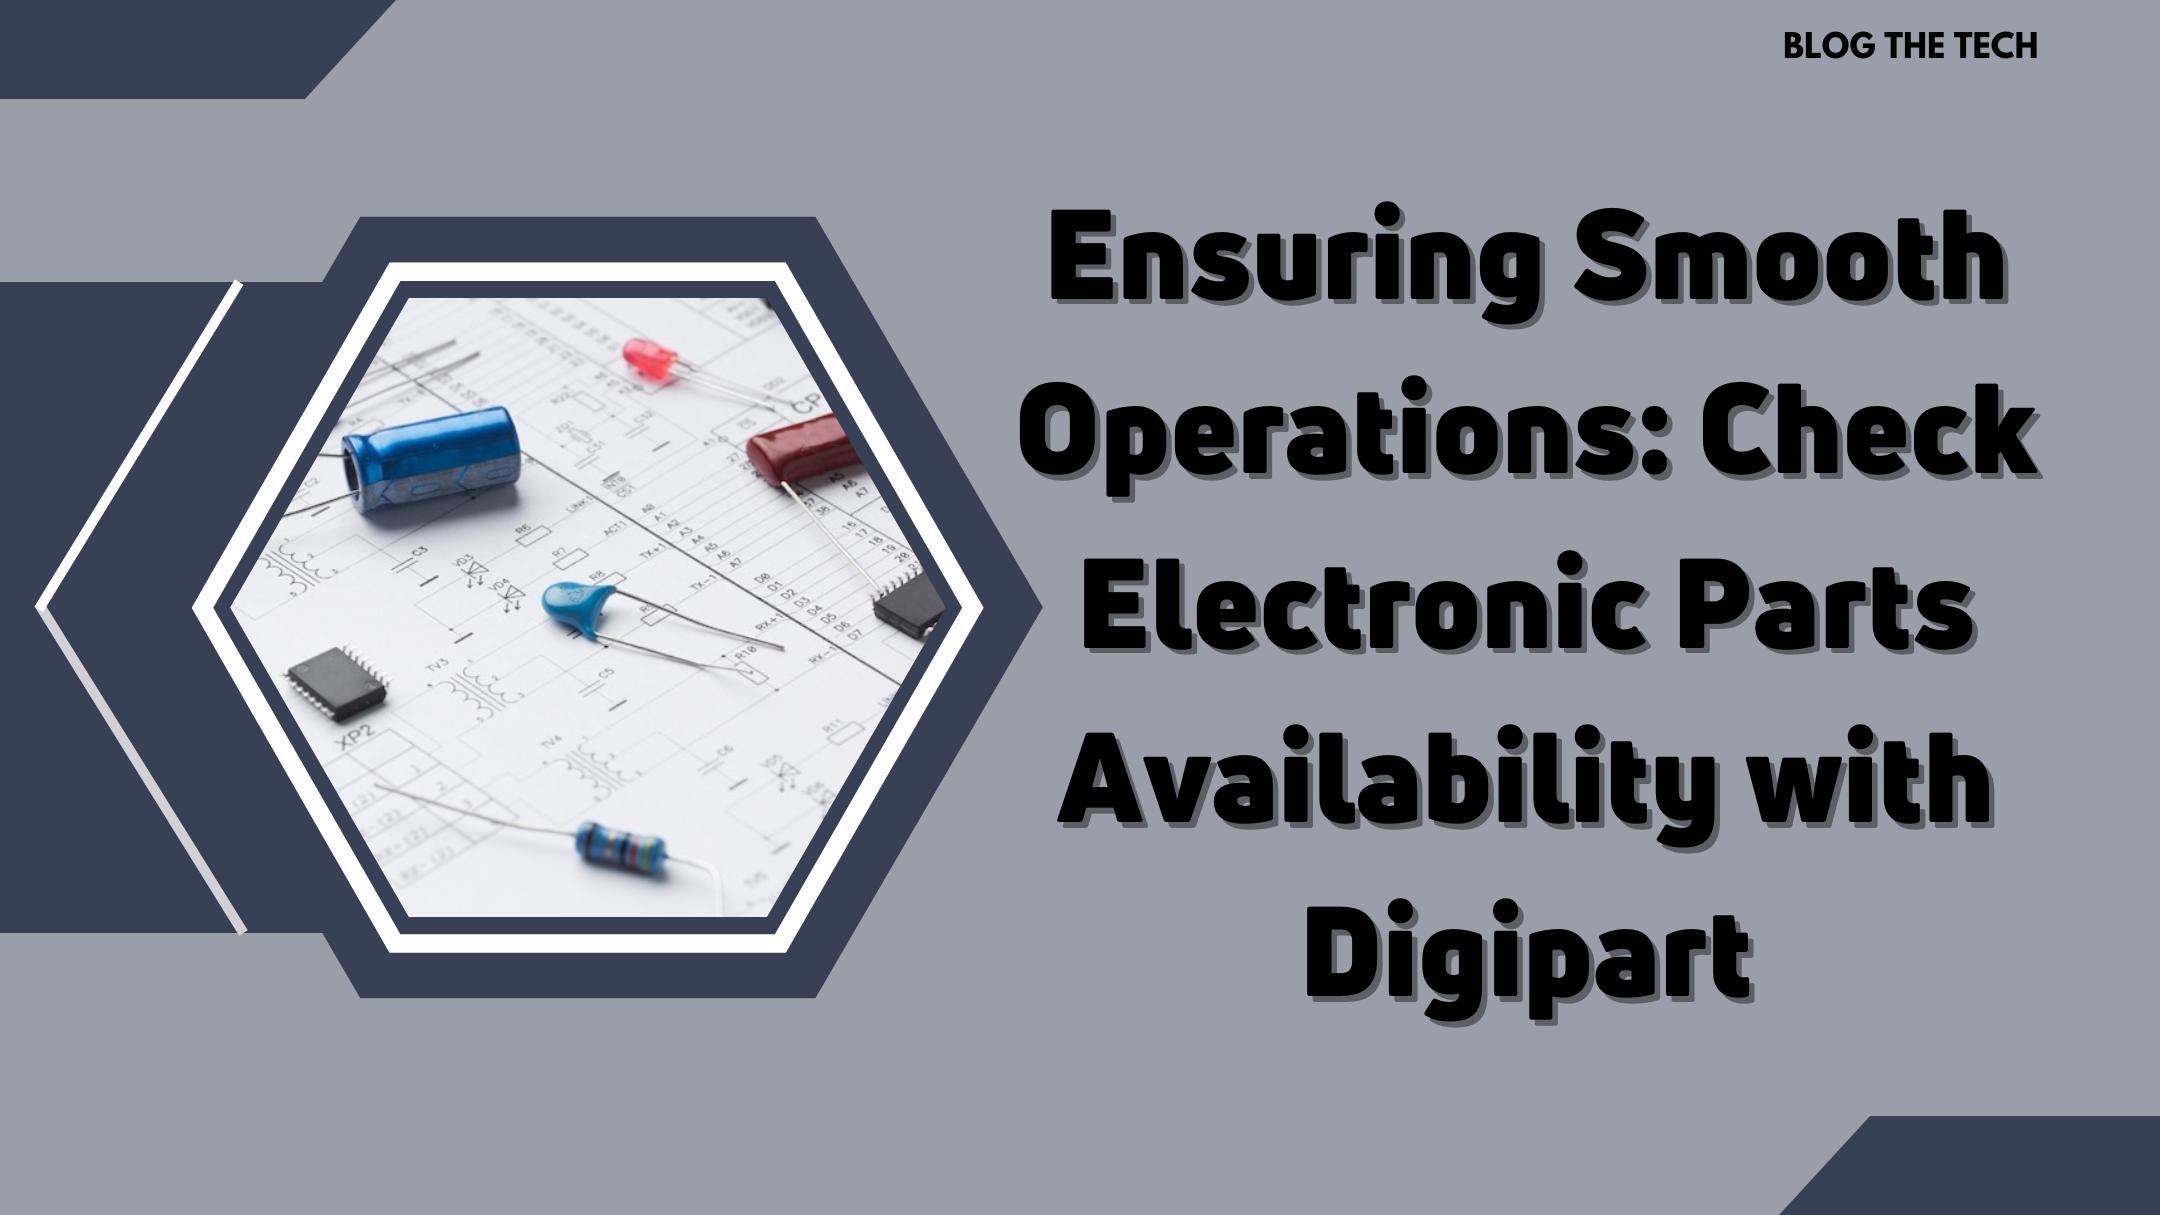 Ensuring Smooth Operations: Check Electronic Parts Availability with Digipart